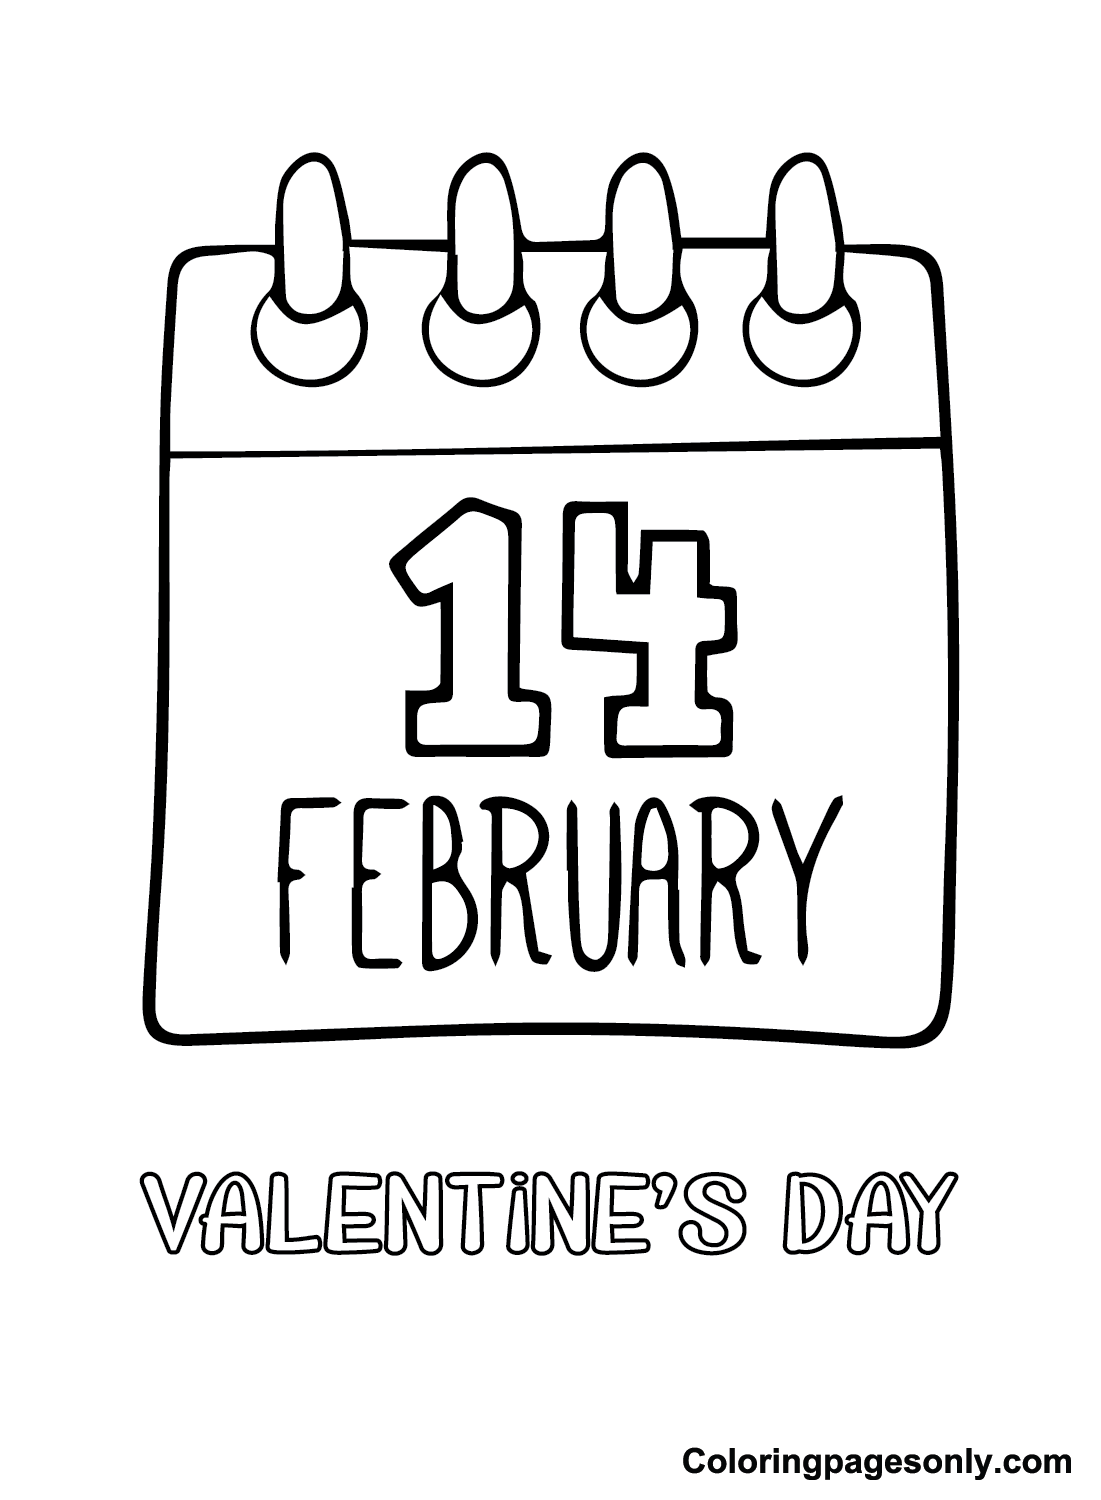 Valentines Day Card Printable Coloring Page